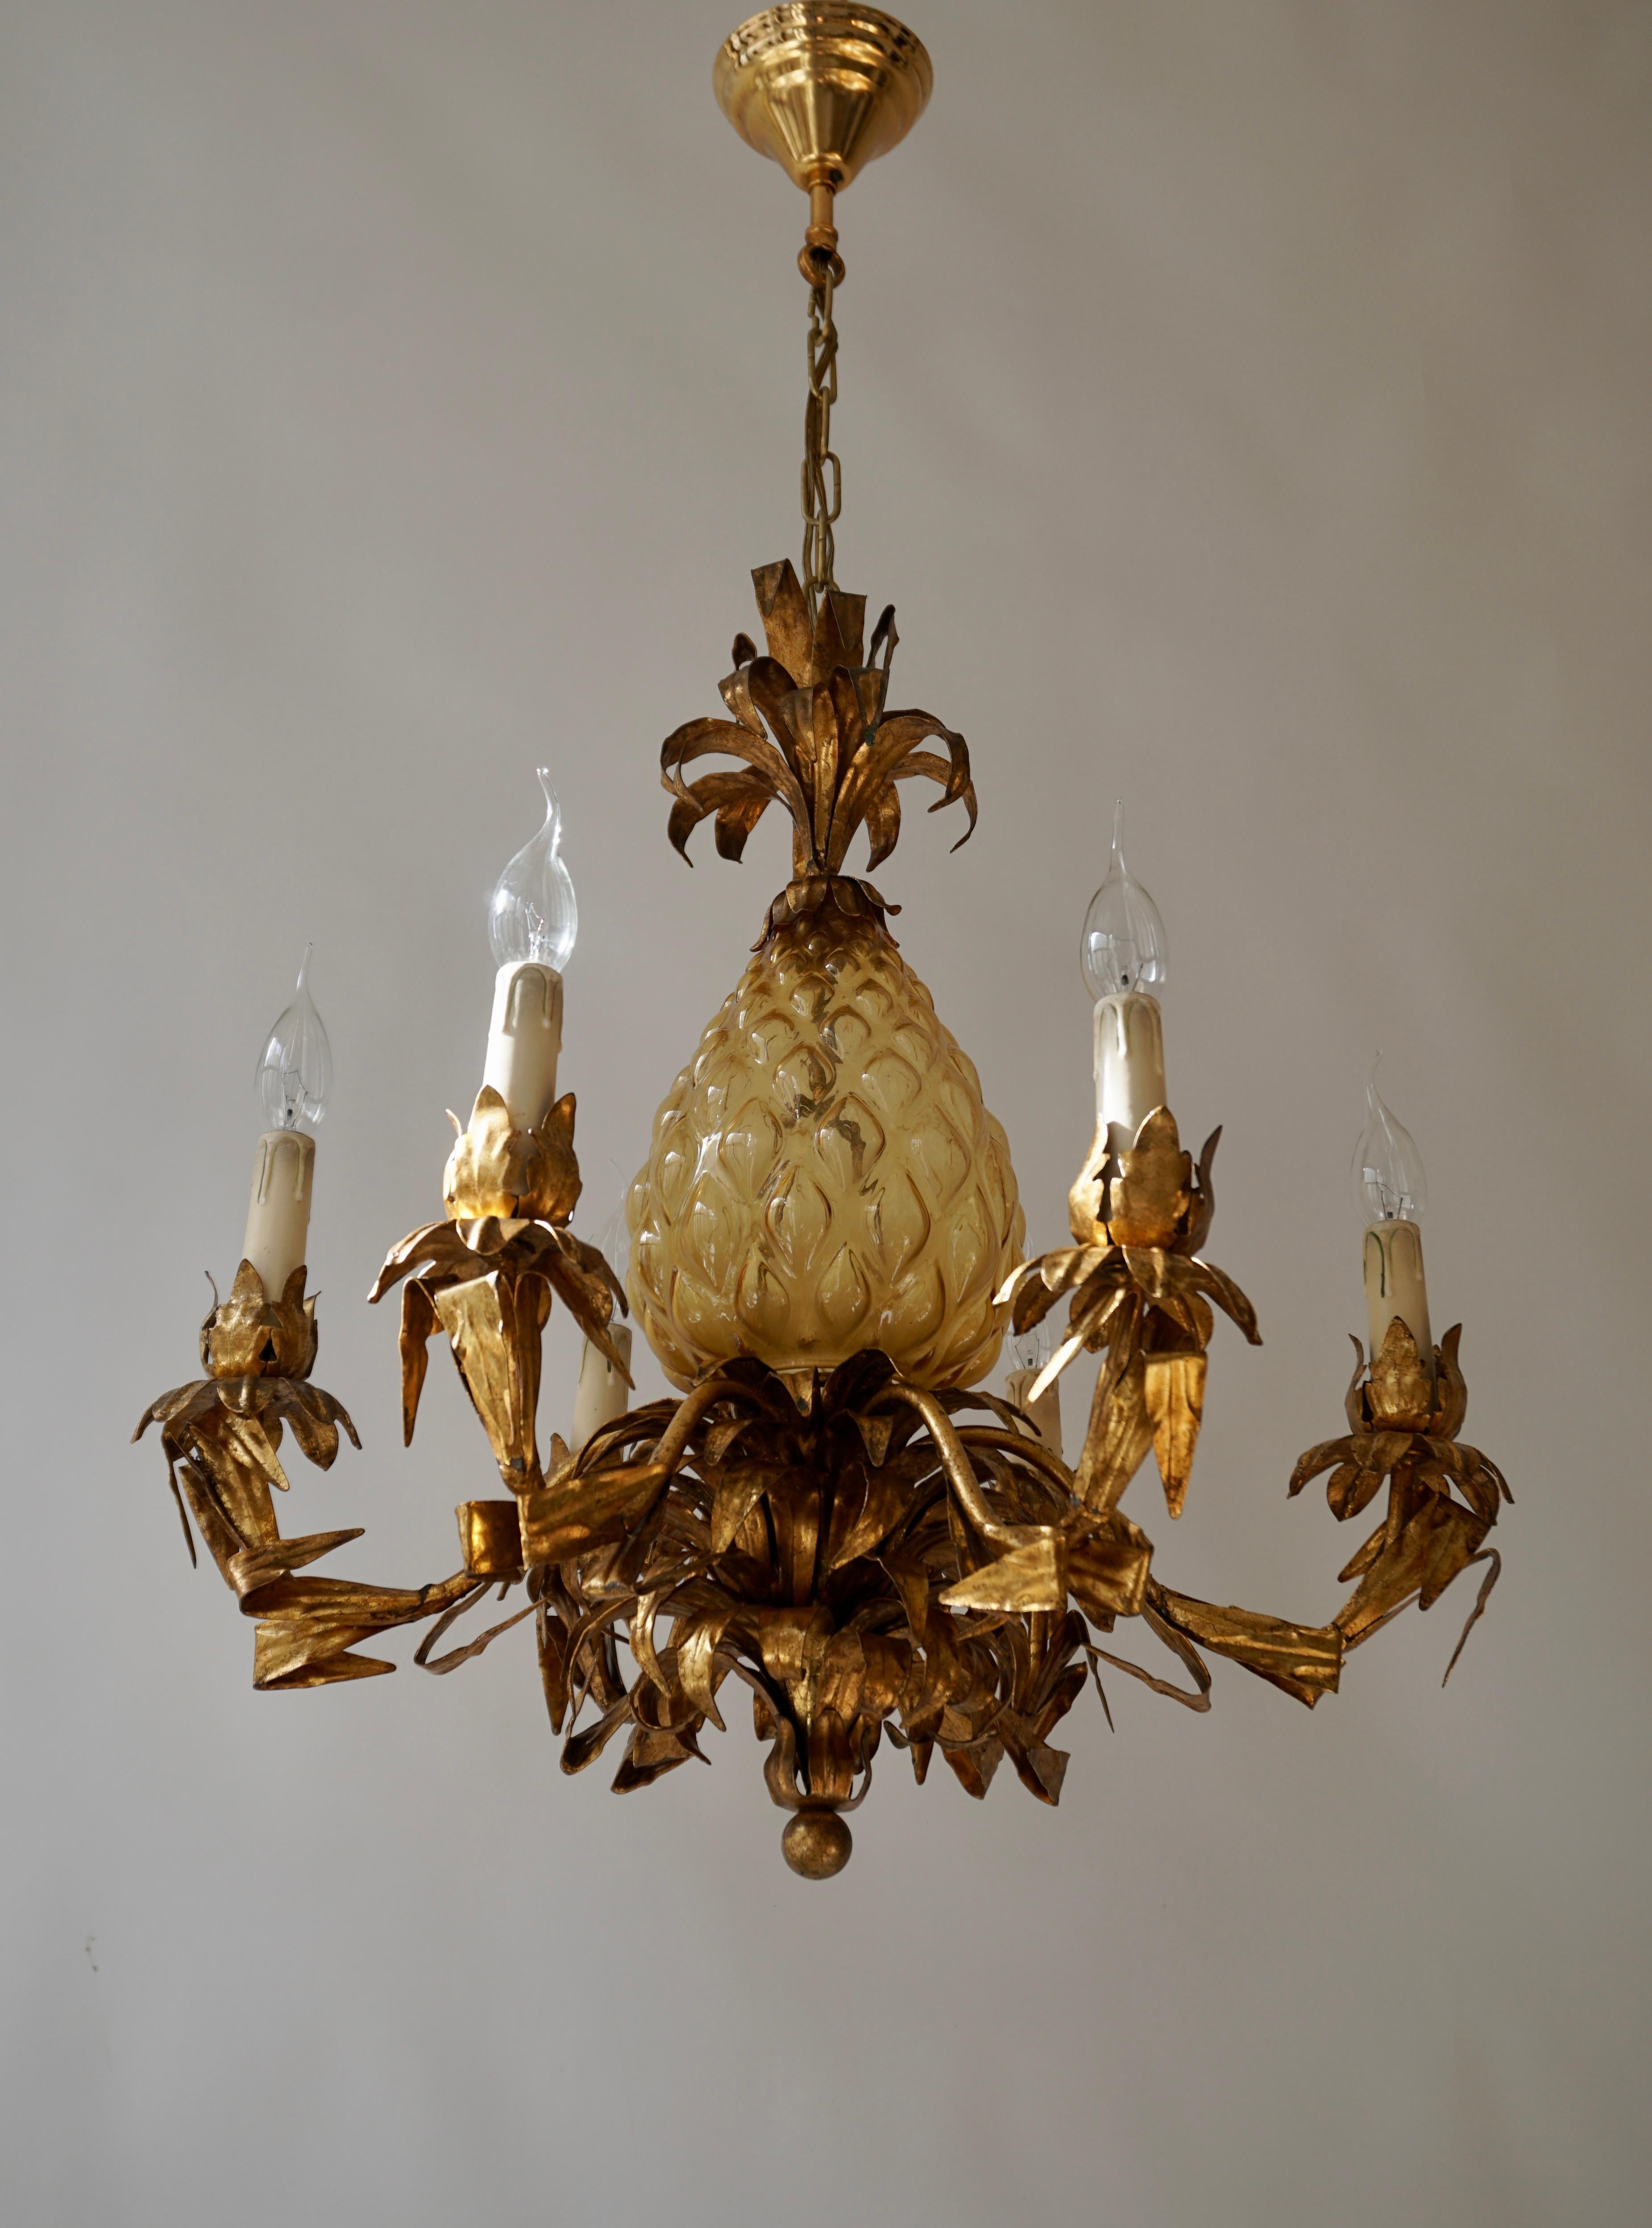 Rare circa 1970s brass and Murano glass multi arm chandelier with pineapple motif. Made in Italy. 

A beautiful timeless high quality chandelier that will enhance any setting.Good luminating light spread, in very good condition.Please note of wear